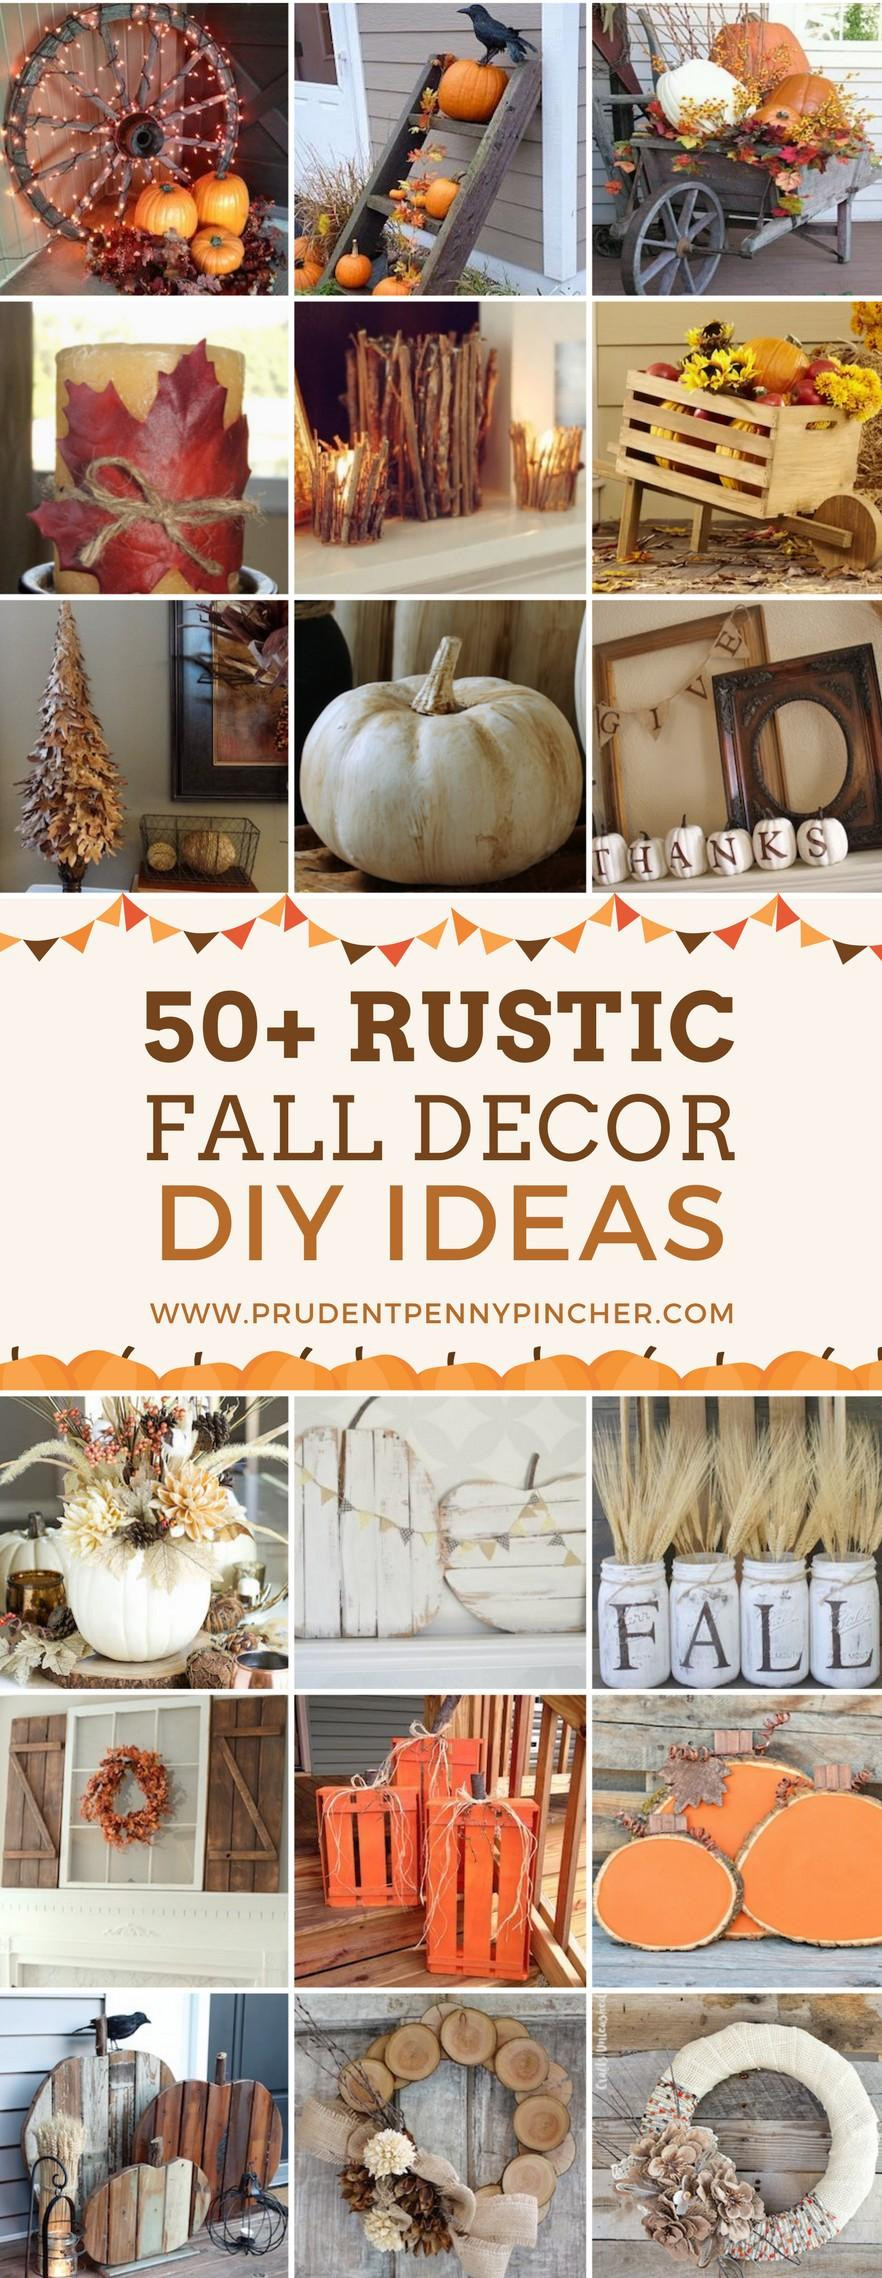 27 Elegant Holiday Vase Filler 2024 free download holiday vase filler of fall decorating ideas diy awesome cheap fall decorations 15 cheap with regard to fall decorating ideas diy awesome cheap fall decorations 15 cheap and easy diy vase fi